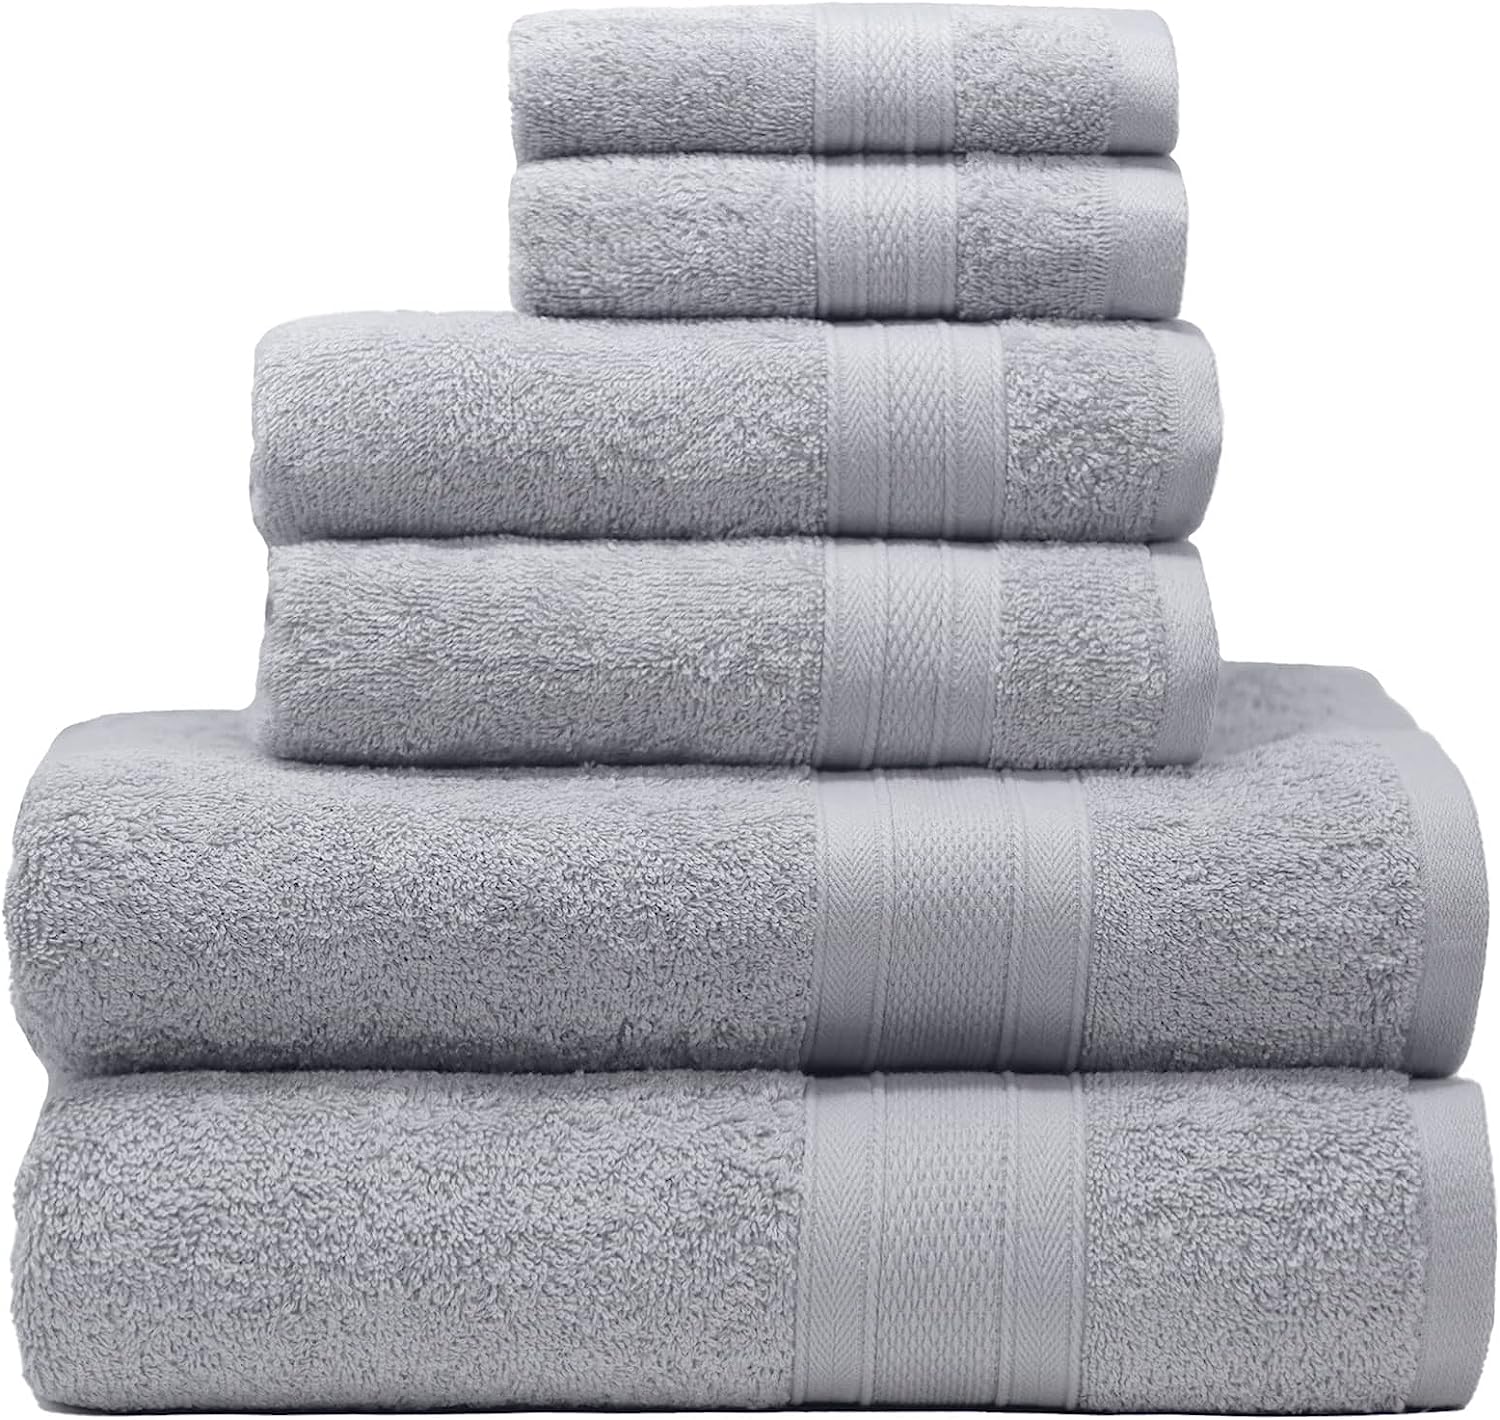 The good life, made better. Charisma Luxury Bath Towels made with